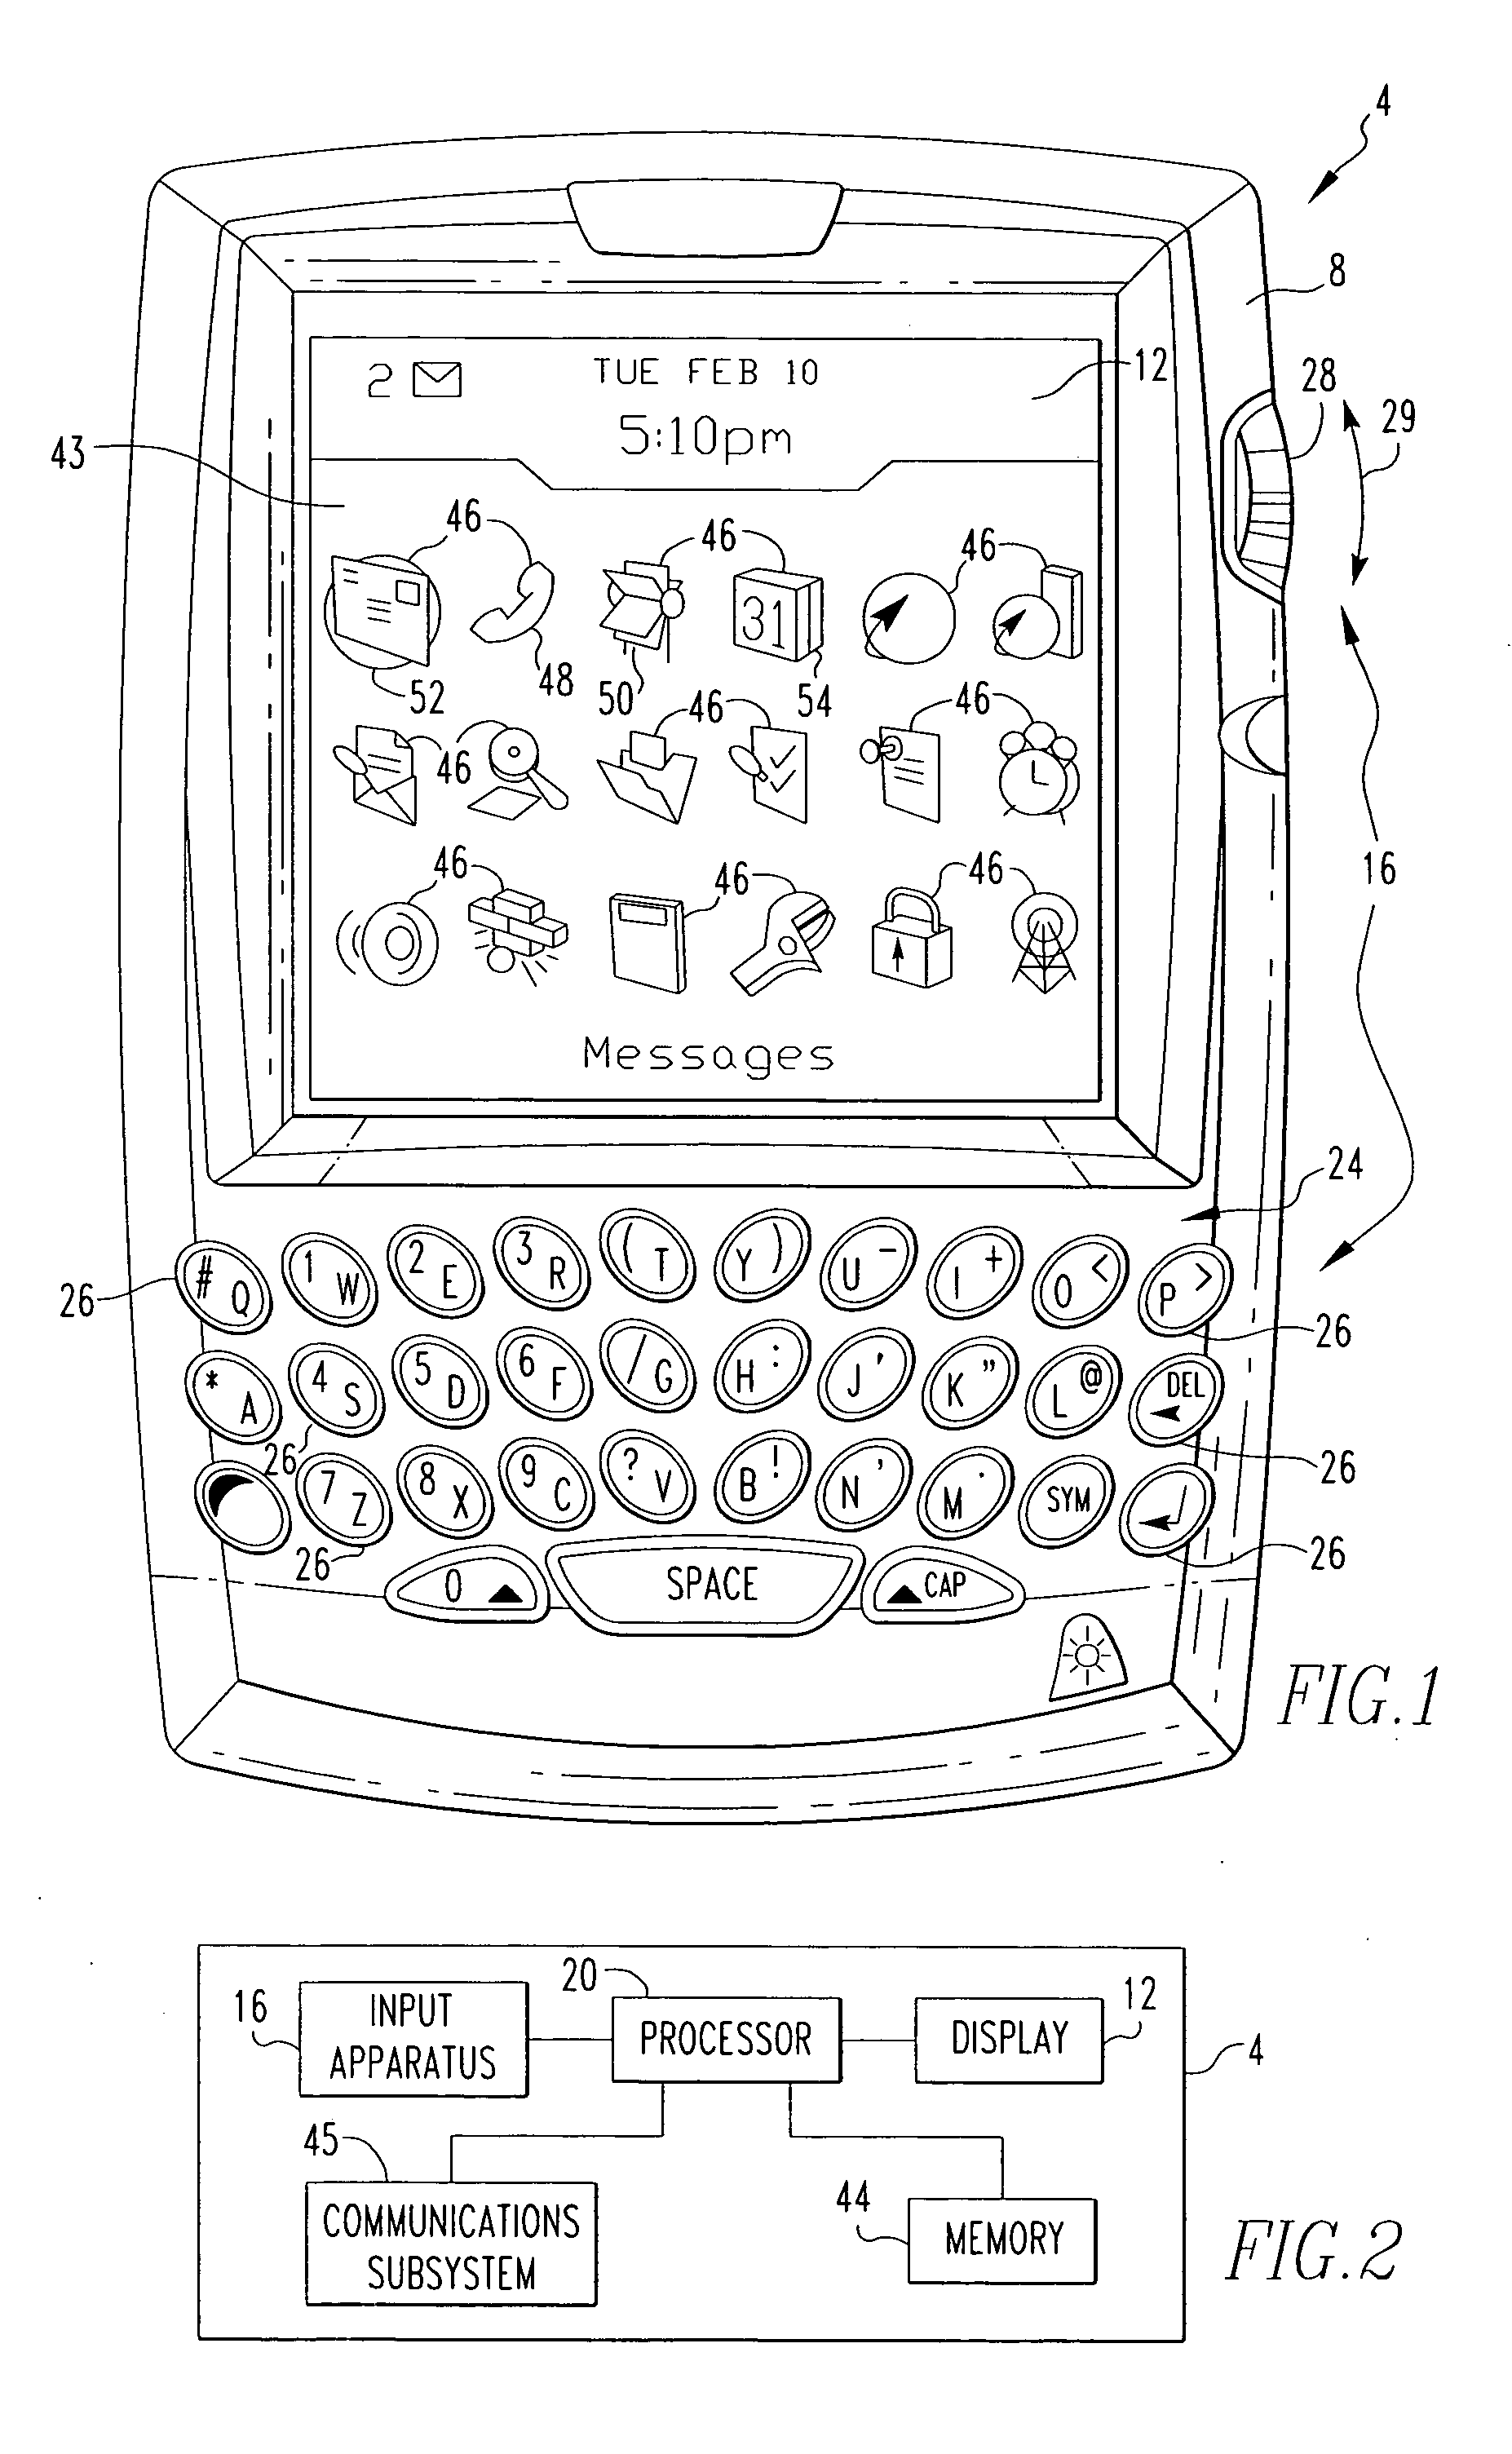 Handheld electronic device including appointment and meeting conflict notification, and associated method